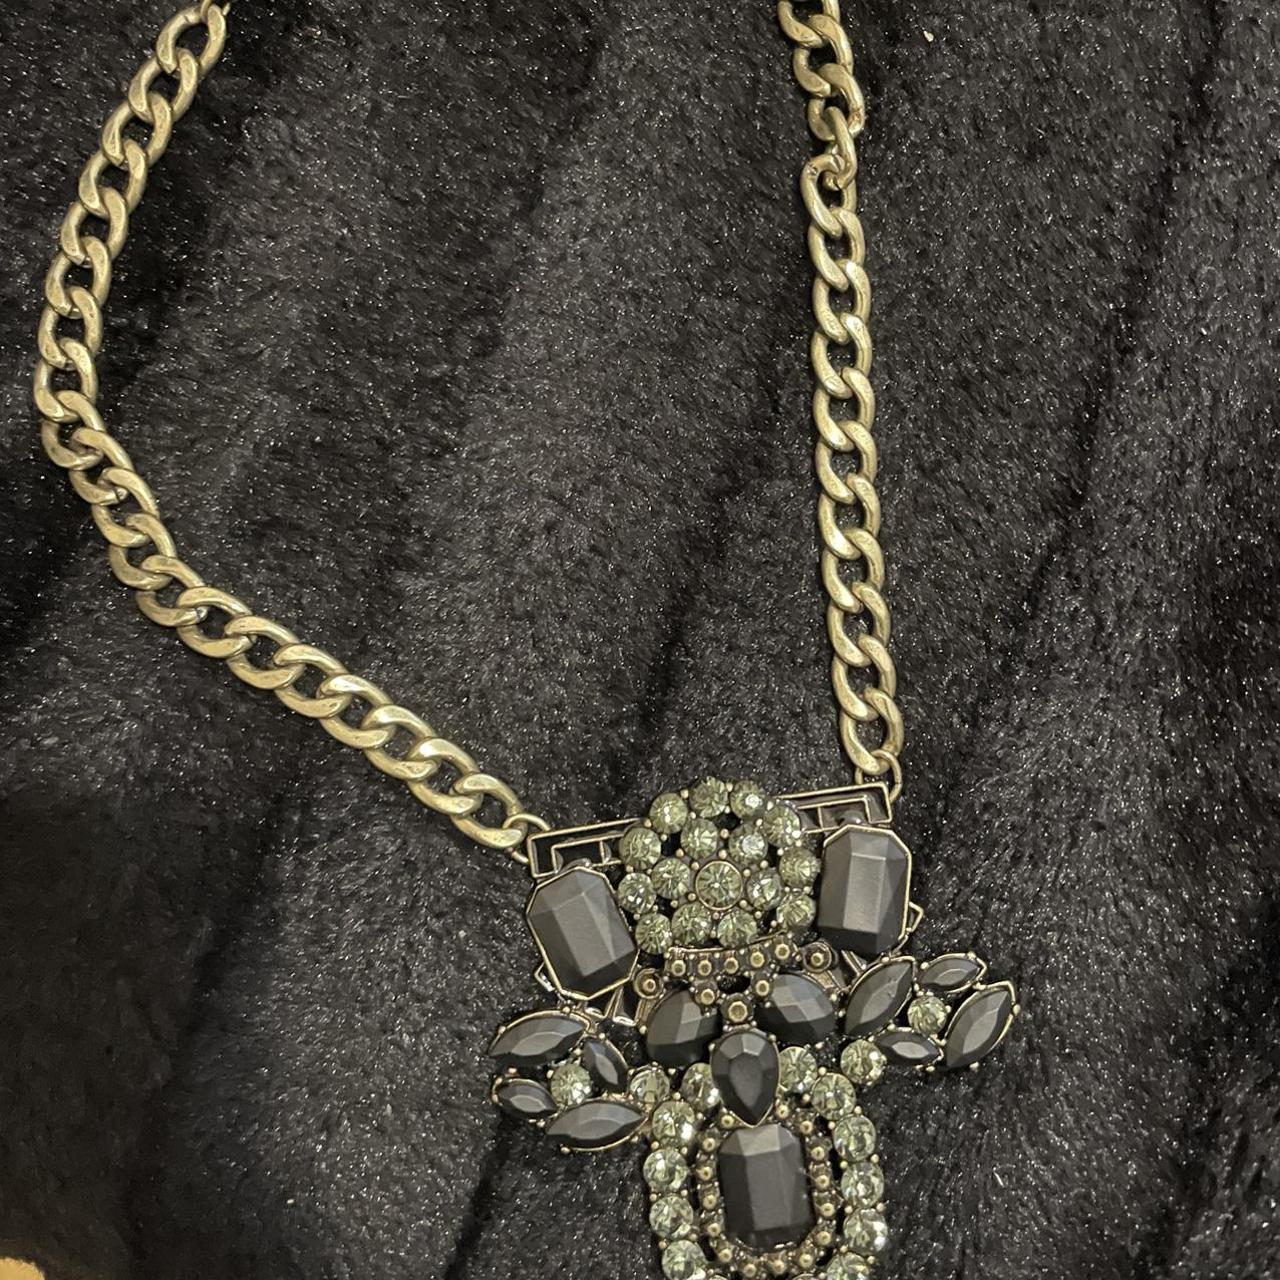 Reworked Chanel Necklace *SOLD OUT OF BLACK AND - Depop